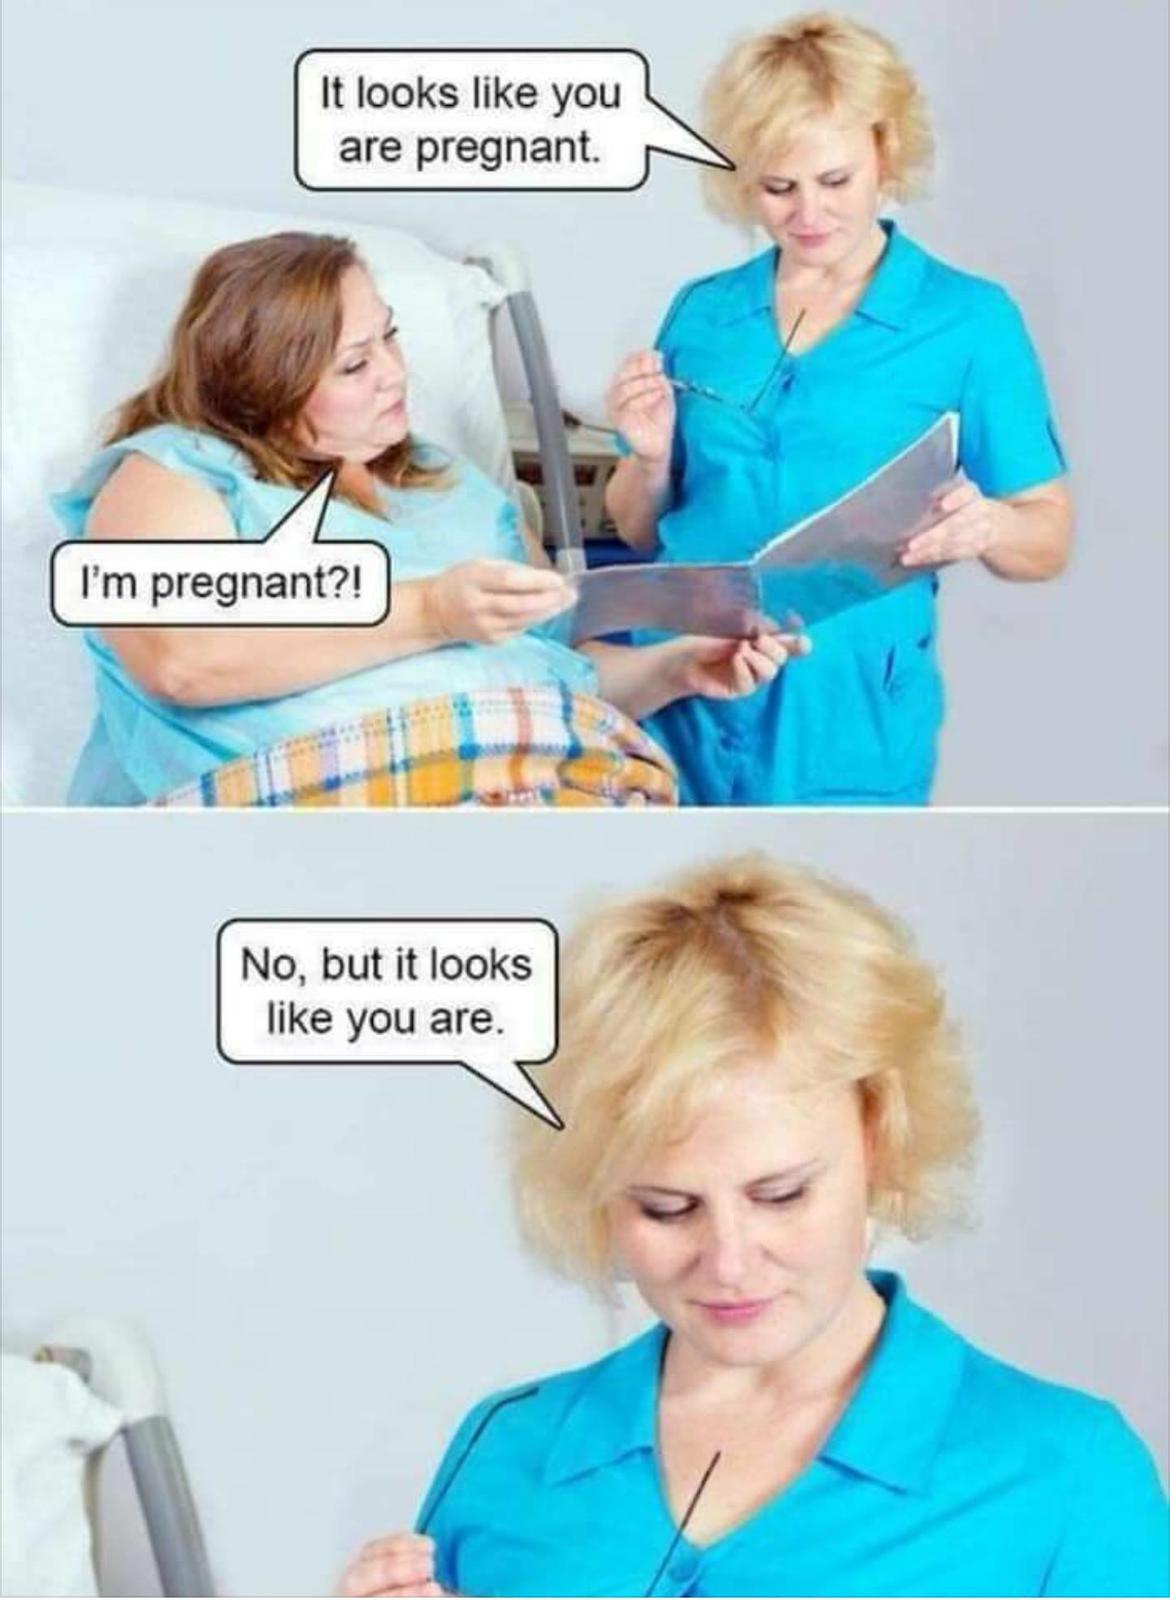 funny memes - dank memes - looks like you re pregnant meme - It looks you are pregnant. I'm pregnant?! No, but it looks you are.